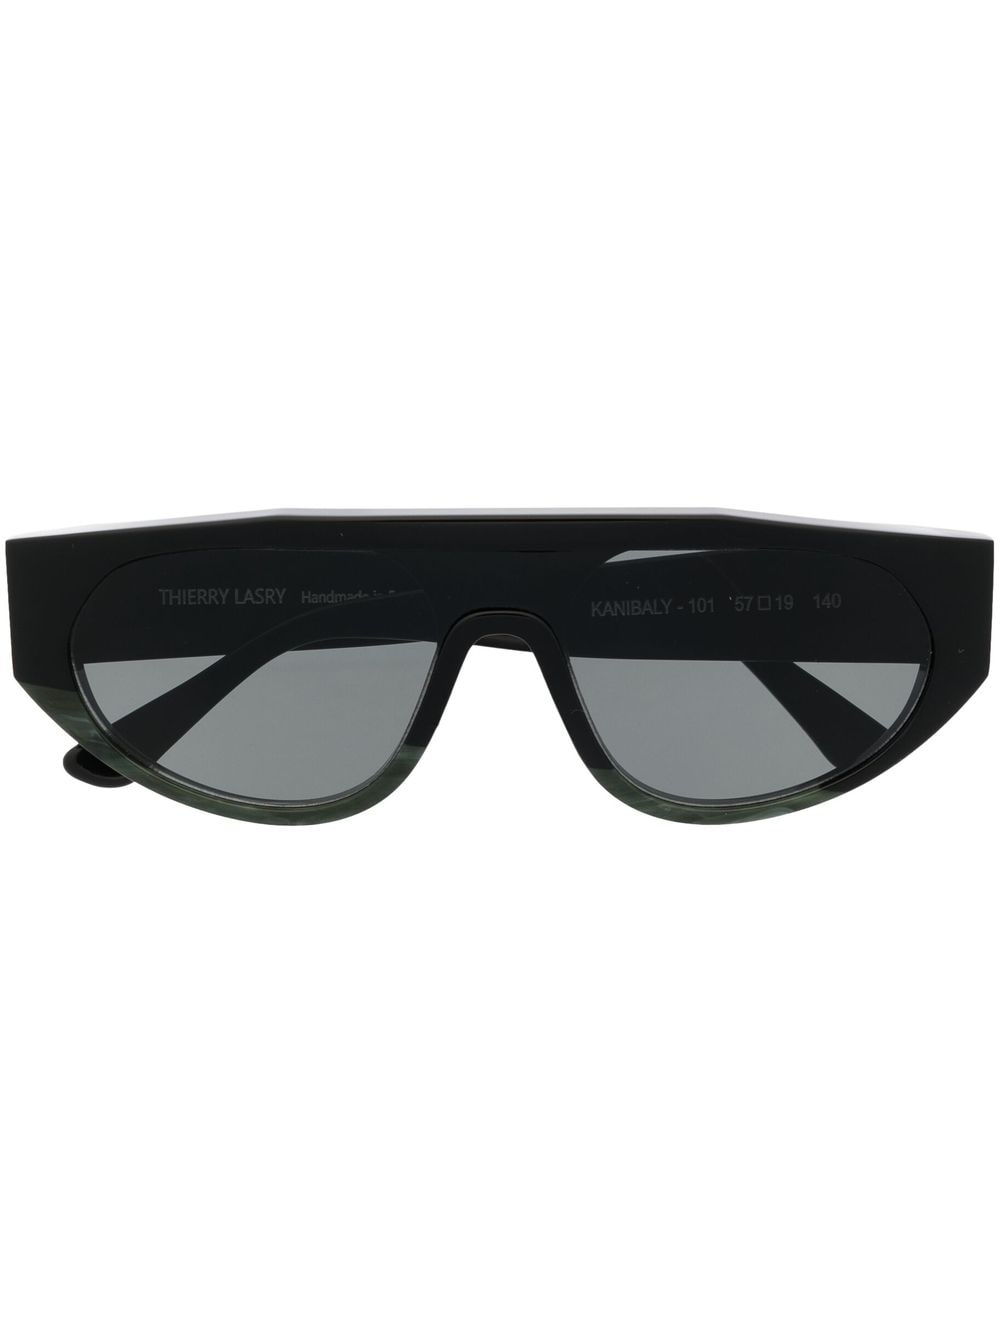 Thierry Lasry oversize arms sunglasses - Black von Thierry Lasry